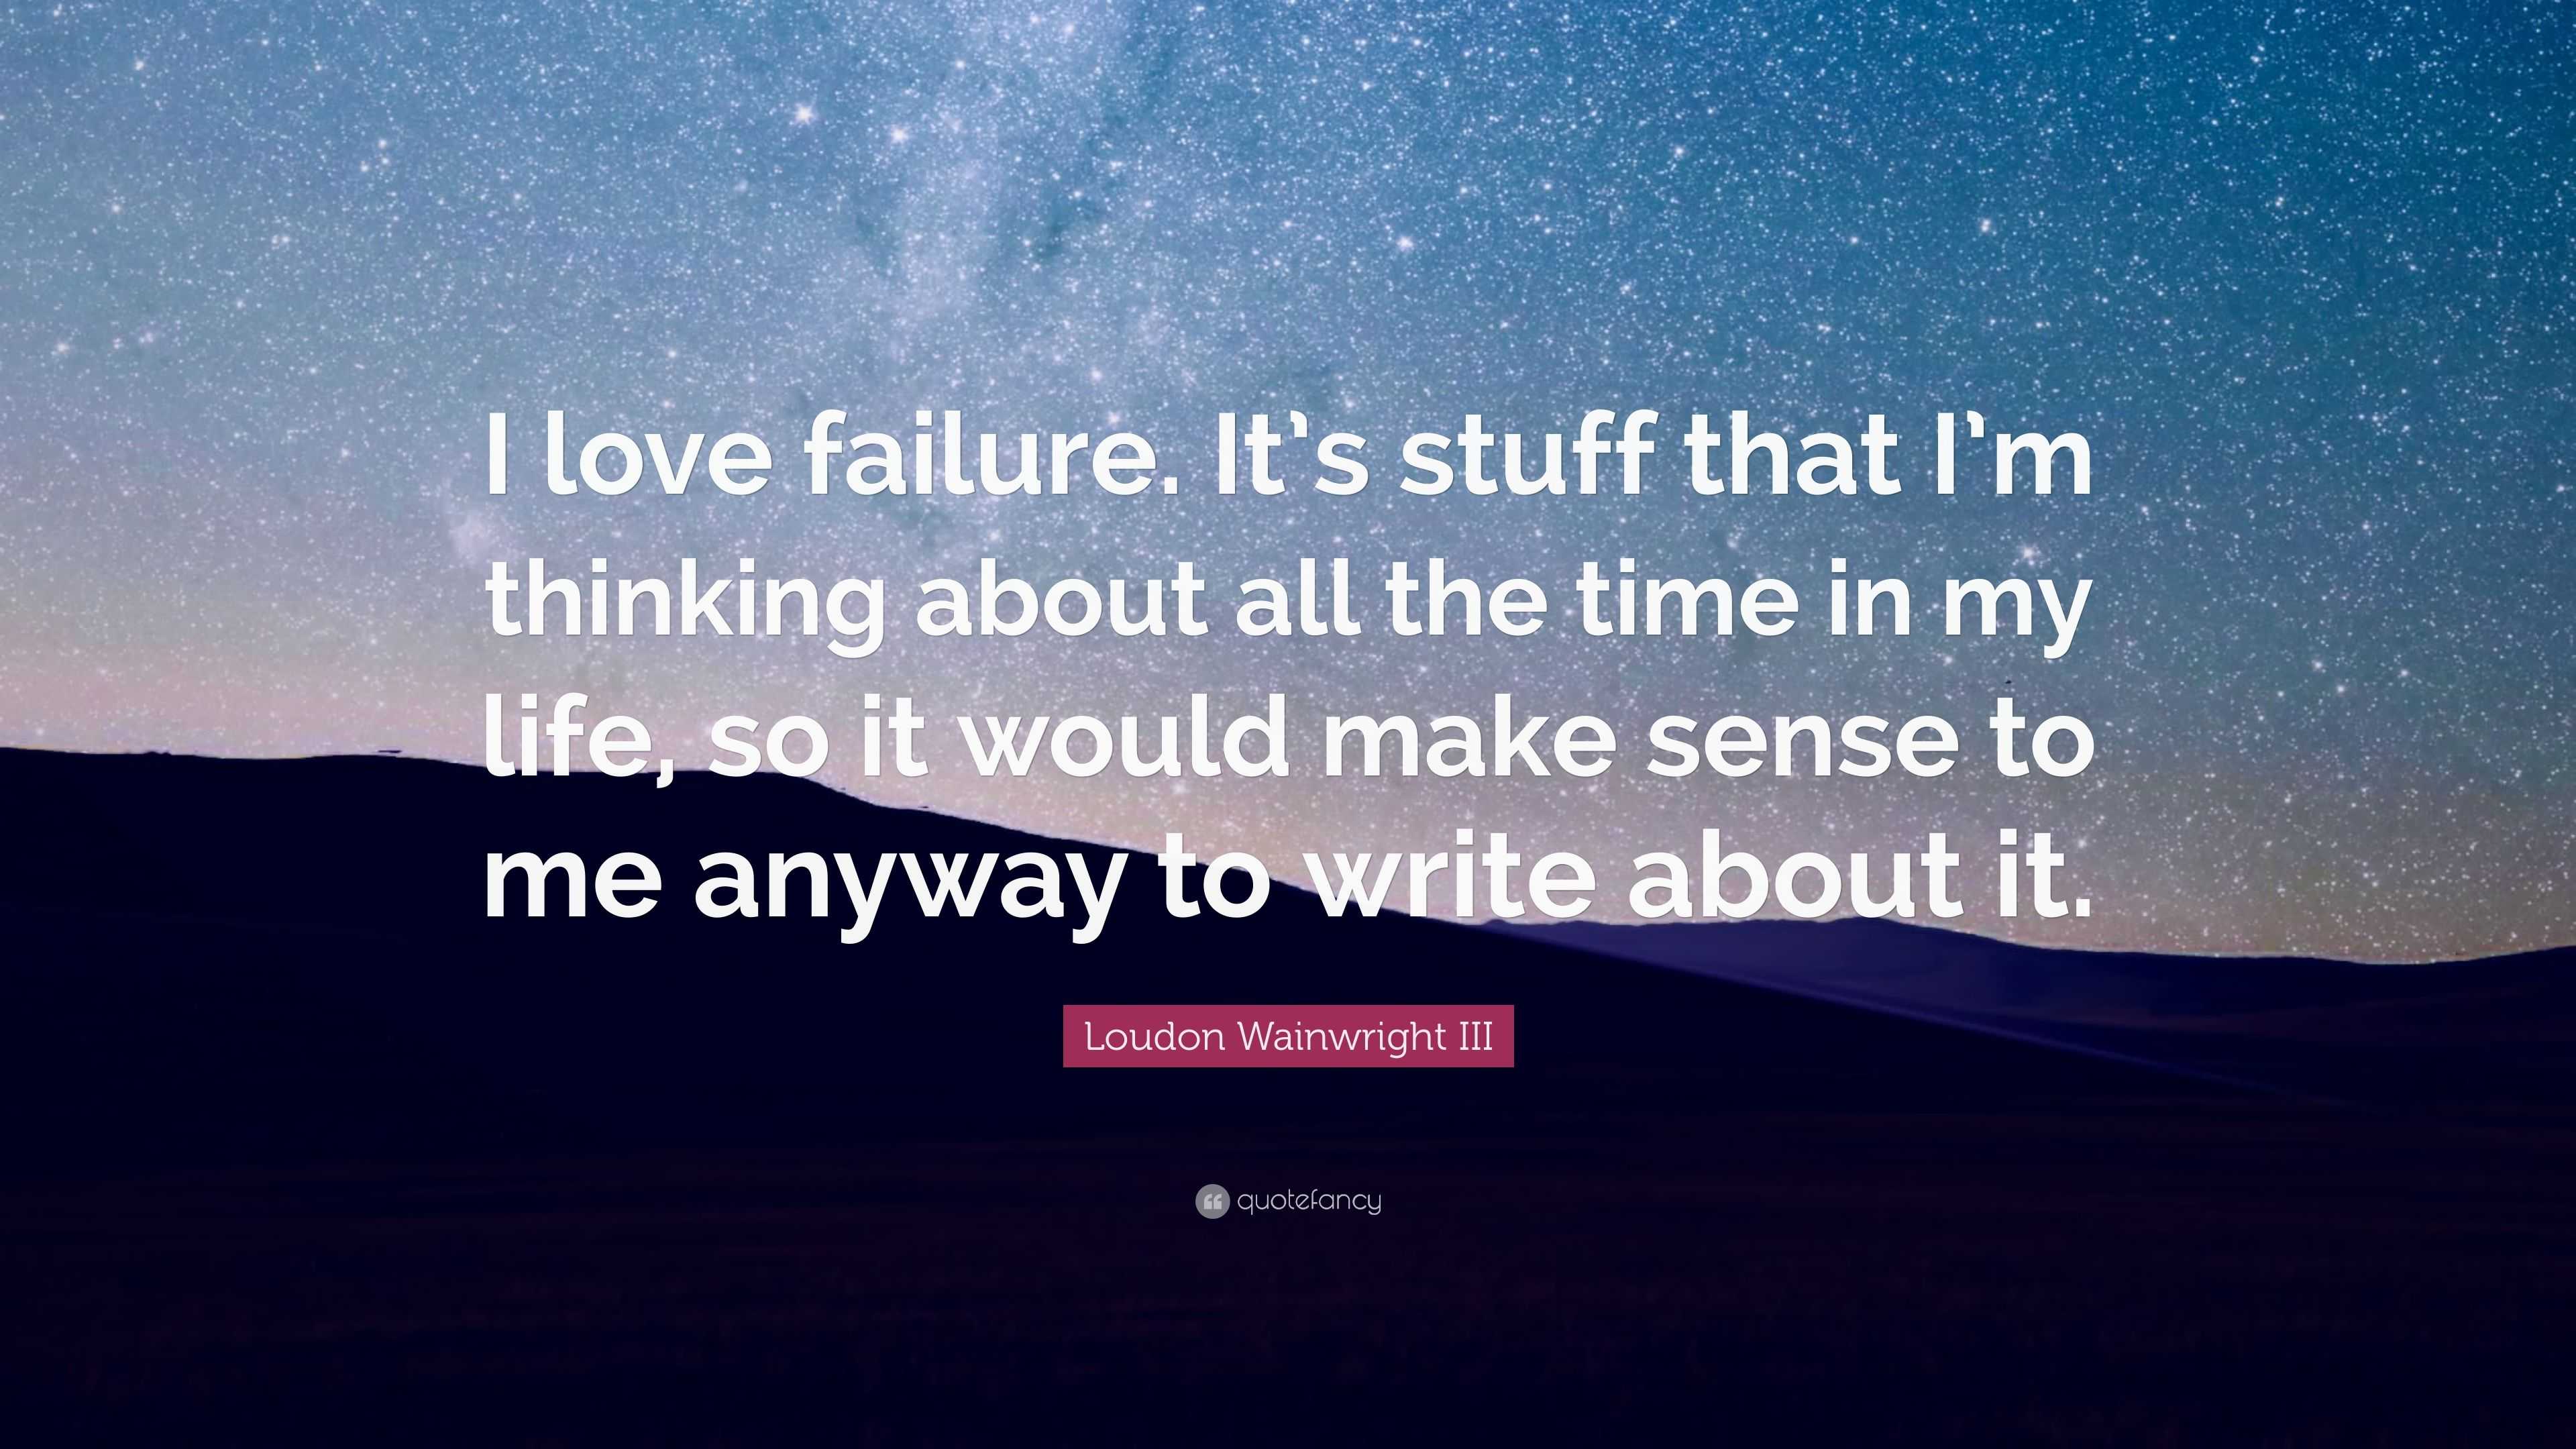 Loudon Wainwright III Quote: “I love failure. It's stuff that I'm thinking  about all the time in my life, so it would make sense to me anyway to  write...”